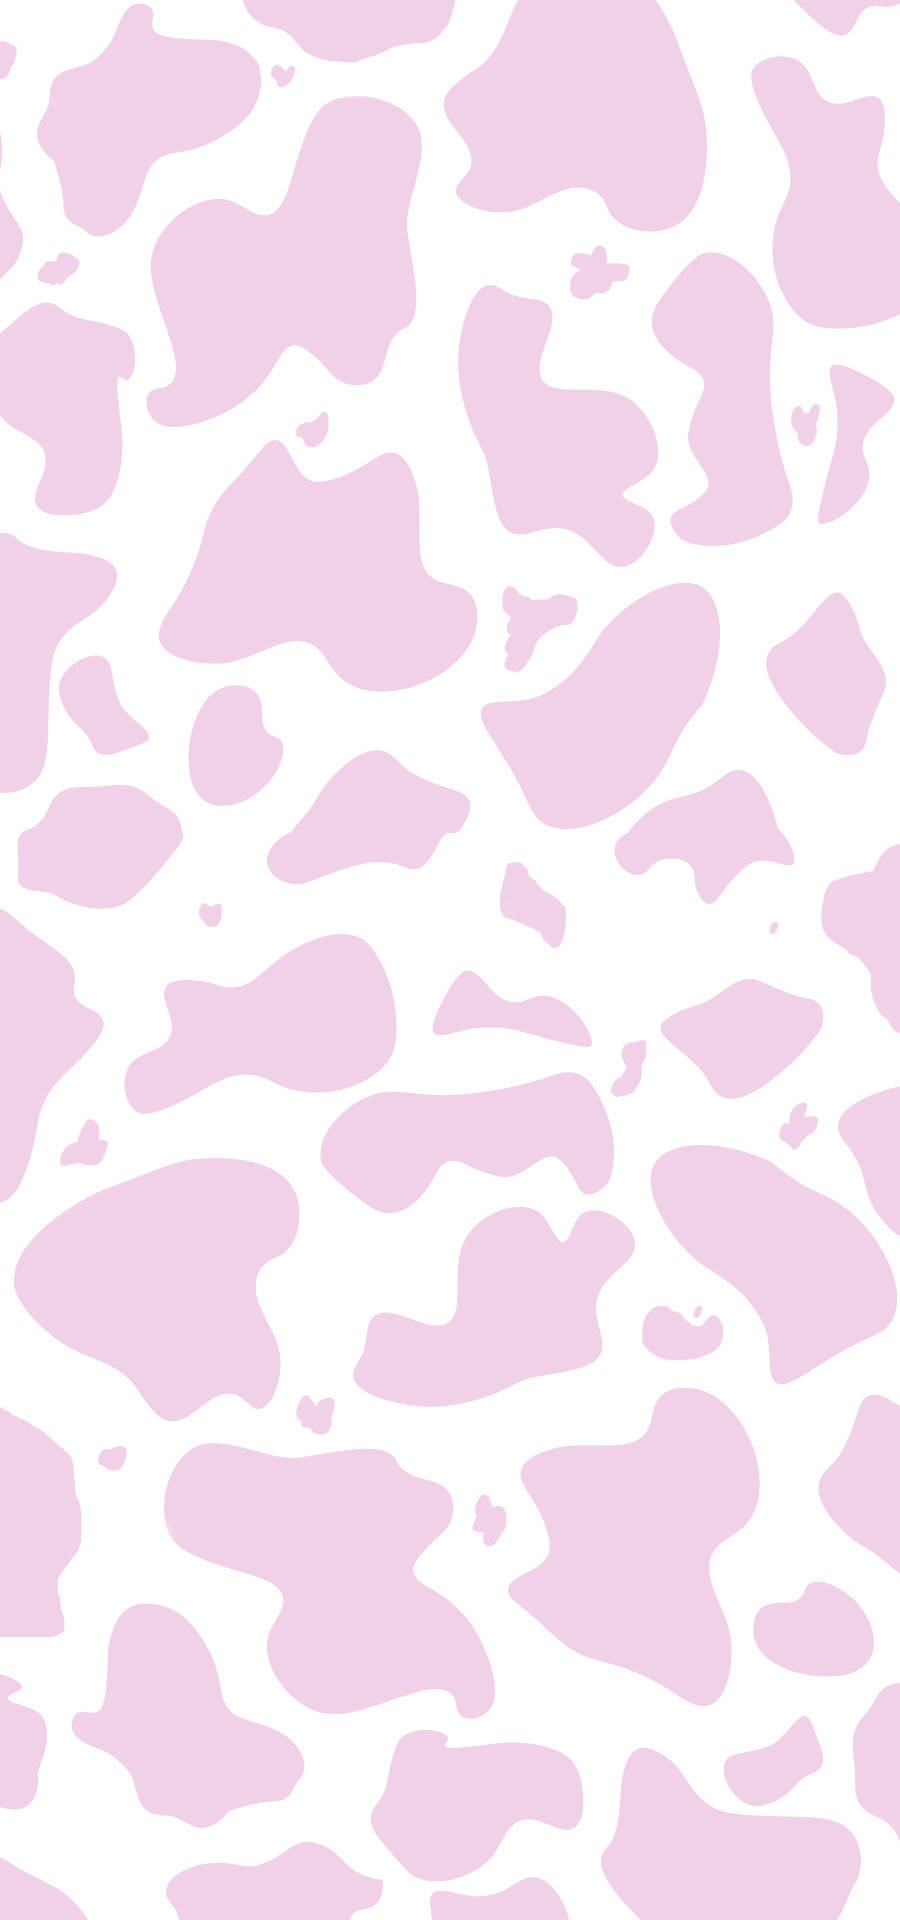 Cow Pattern With Pastel Pink Spots